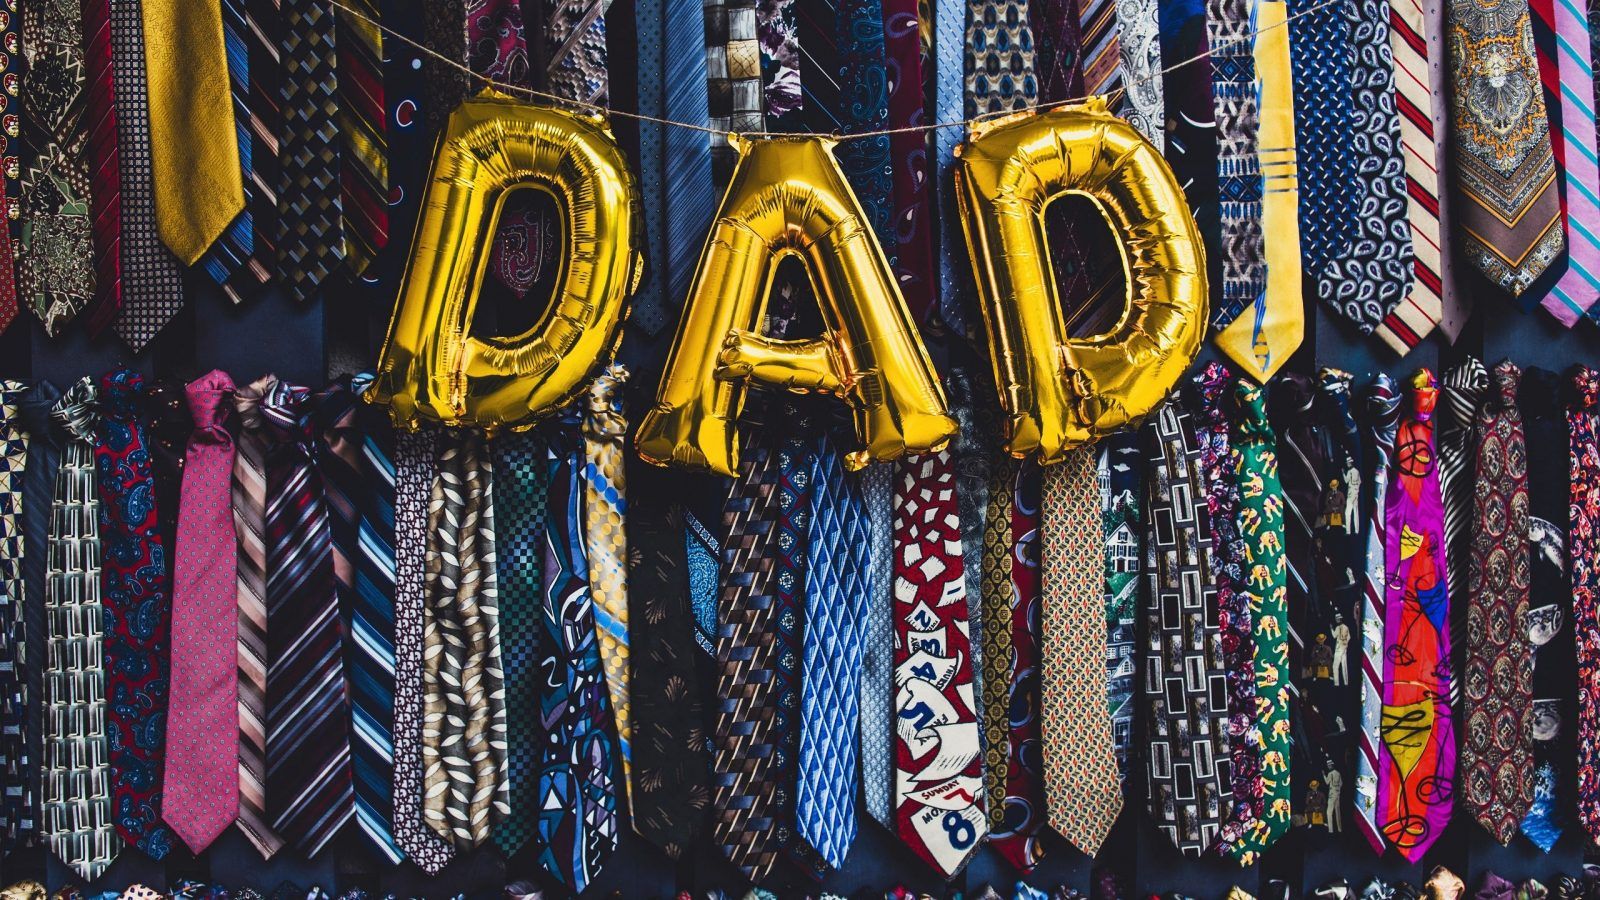 The best ways to celebrate Father’s Day with your dad at home